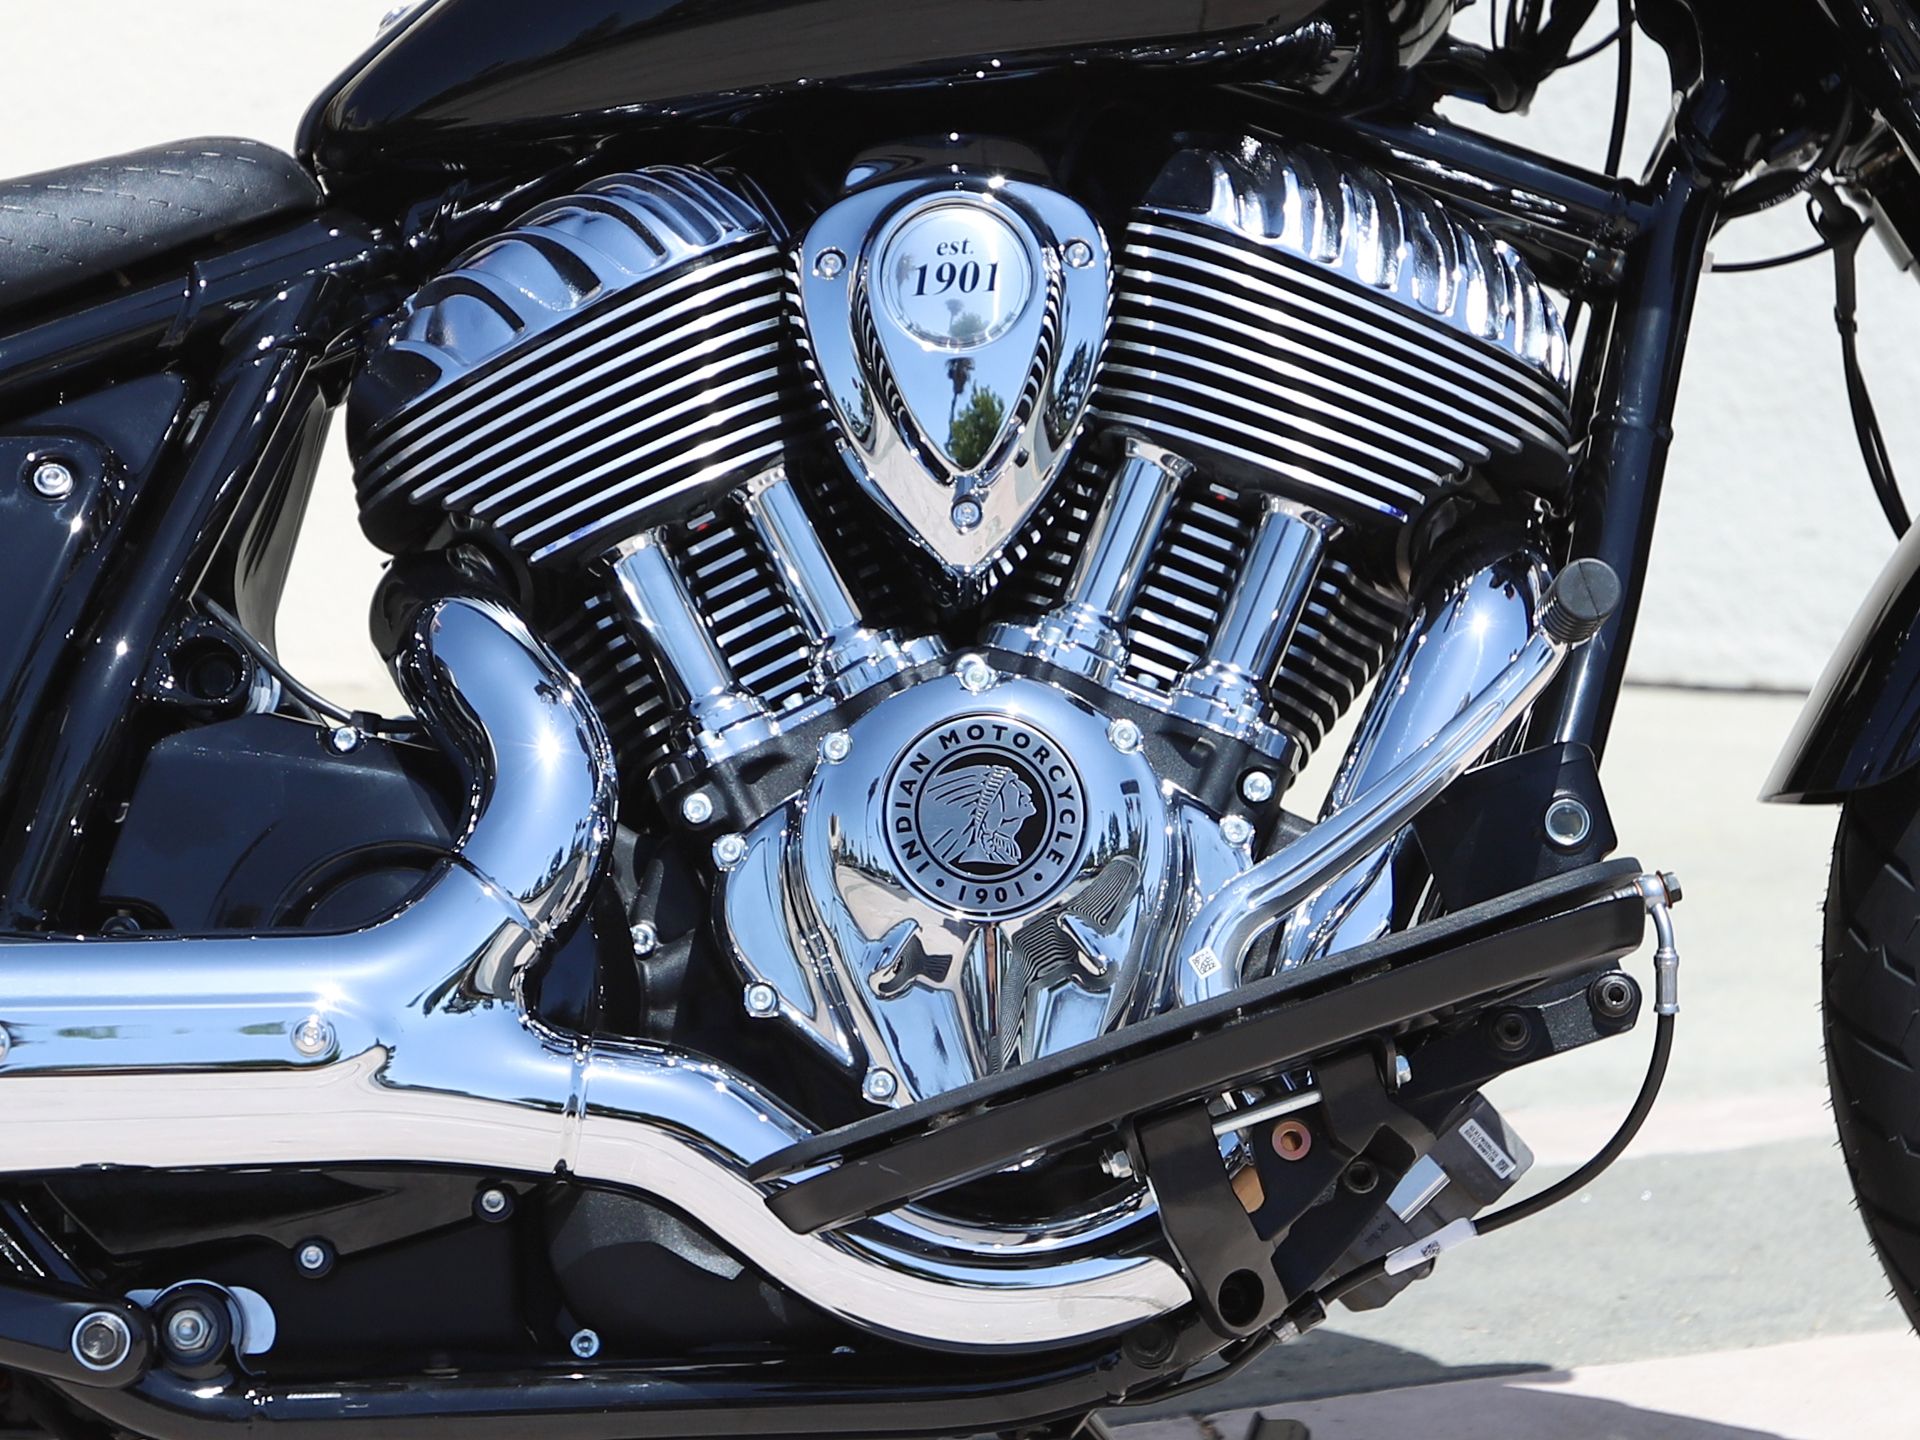 2022 Indian Motorcycle Super Chief Limited ABS in EL Cajon, California - Photo 9